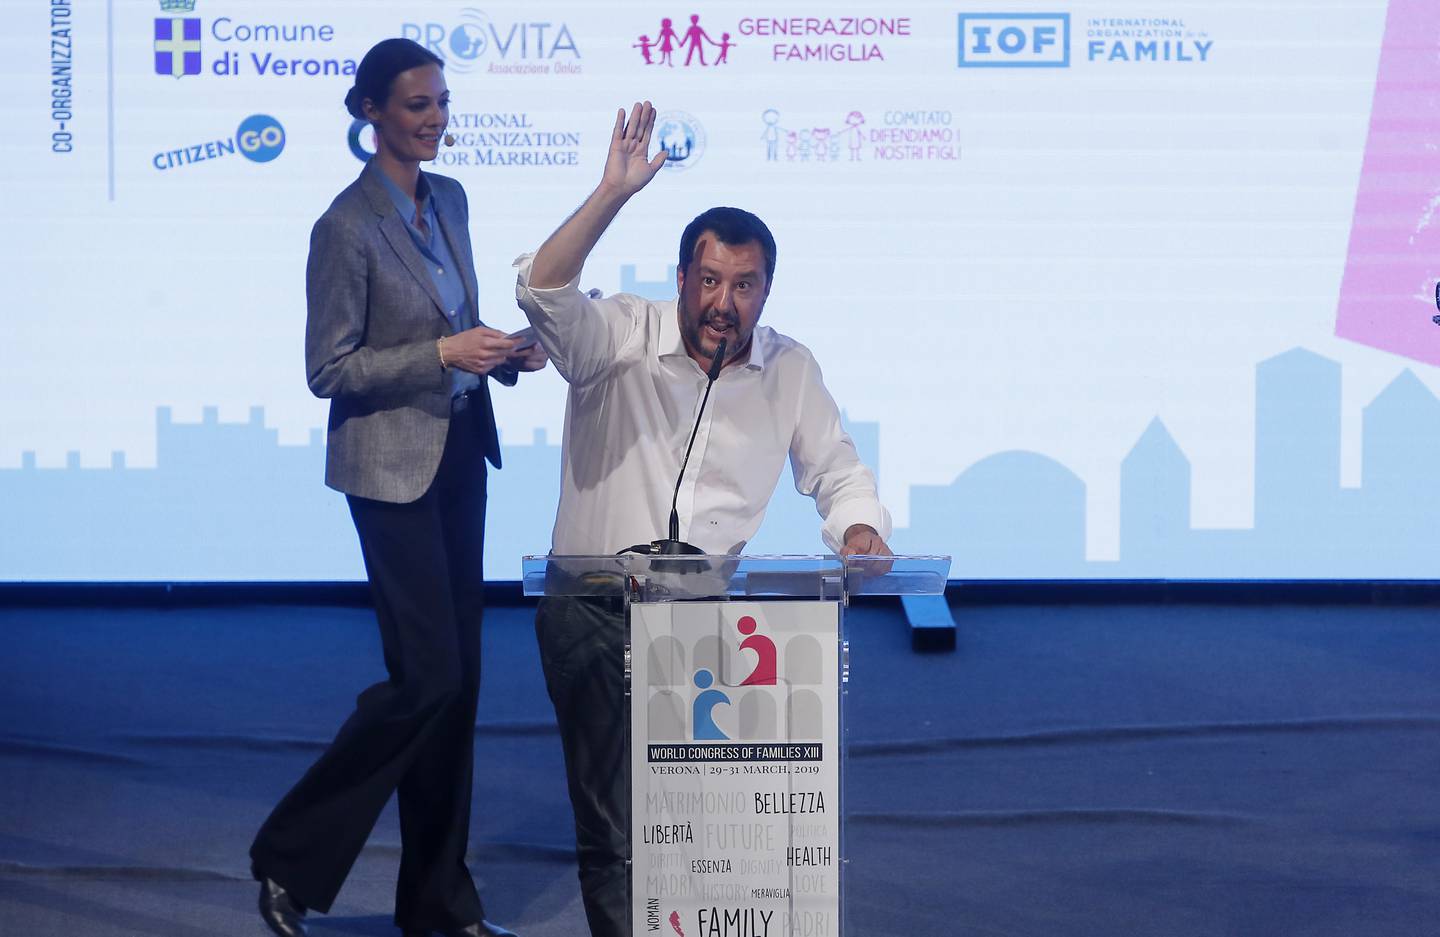 Italian Deputy-Premier Matteo Salvini delivers his speech at the World Congress of Families, in Verona, Italy, Saturday, March 30, 2019. A congress in Italy under the auspices of a U.S. organization that defines family as strictly centering around a mother and father has made Verona ?Äî the city of Romeo and Juliet ?Äî the backdrop for a culture clash over family values, with a coalition of civic groups mobilizing against what they see as a counter-reform movement to limit LGBT and women's rights. (AP Photo/Antonio Calanni)